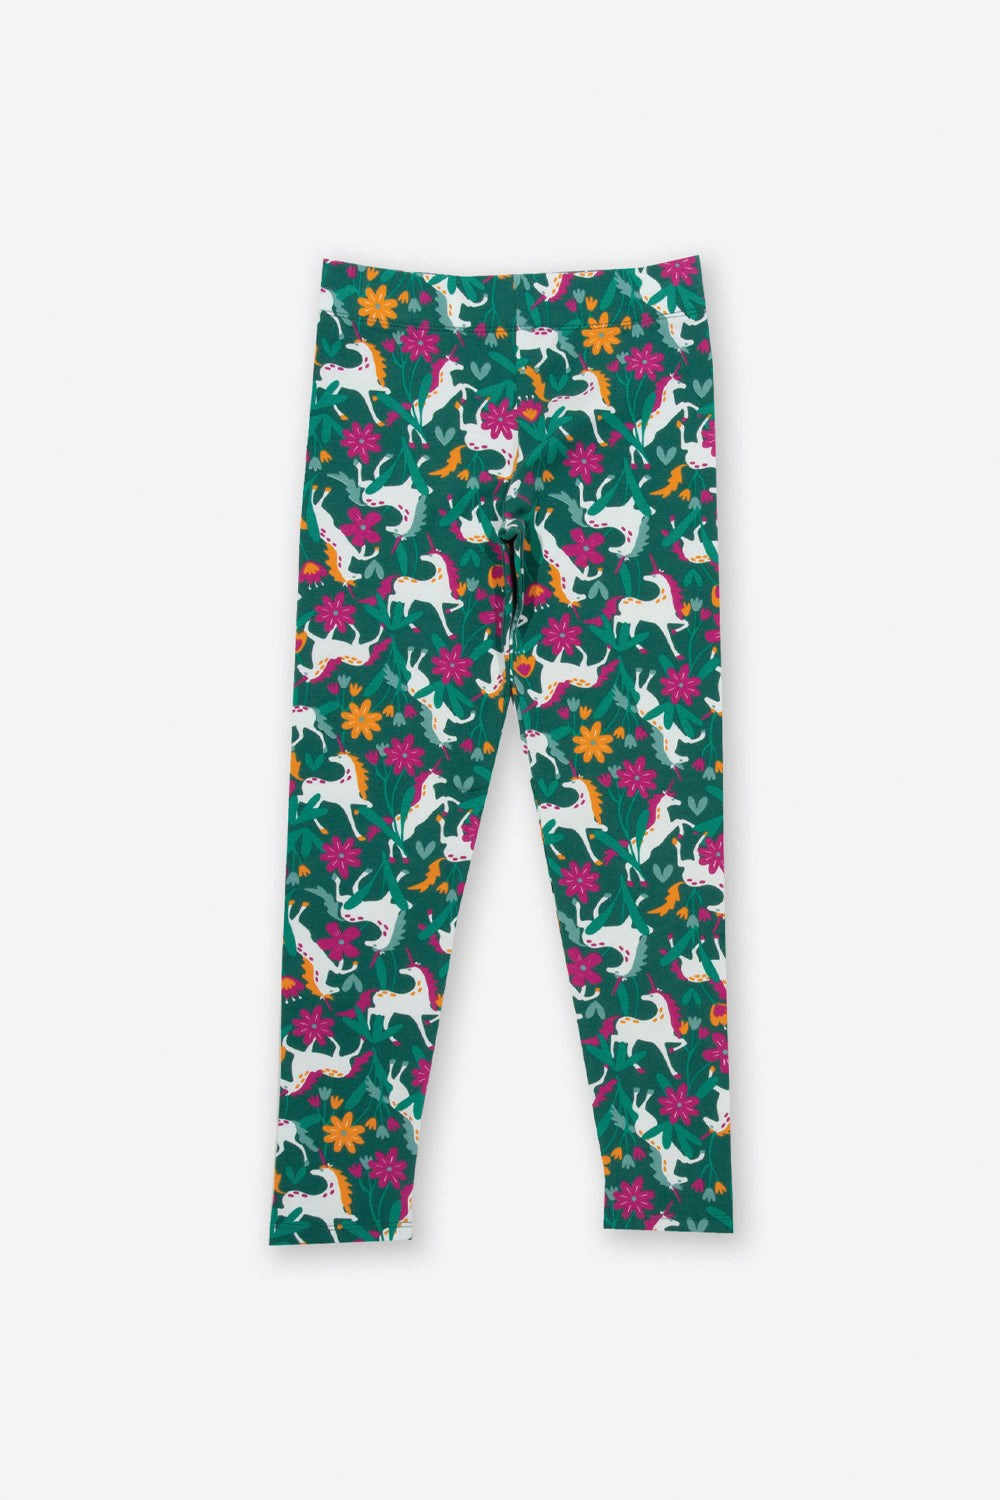 Magical Forest Baby/Kids Leggings -